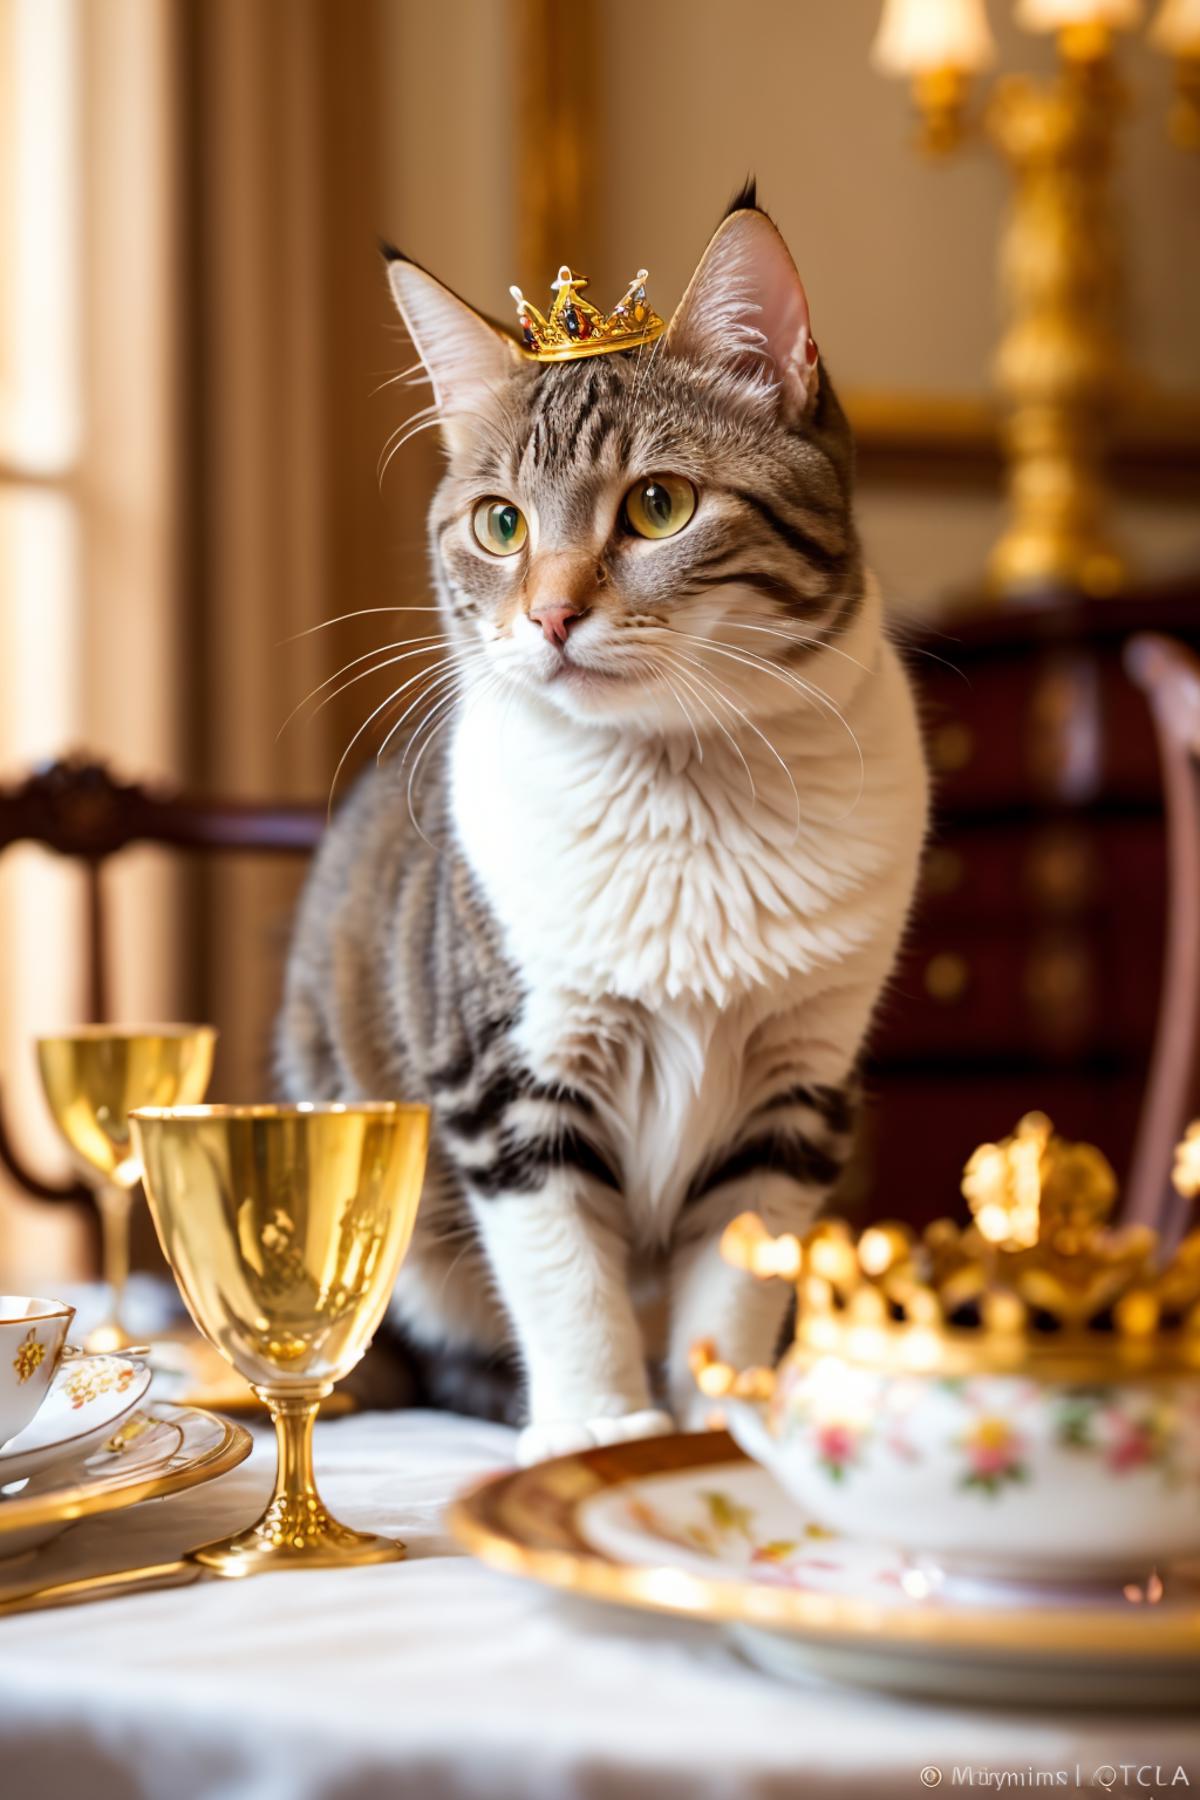 A cat sitting on a table wearing a crown.